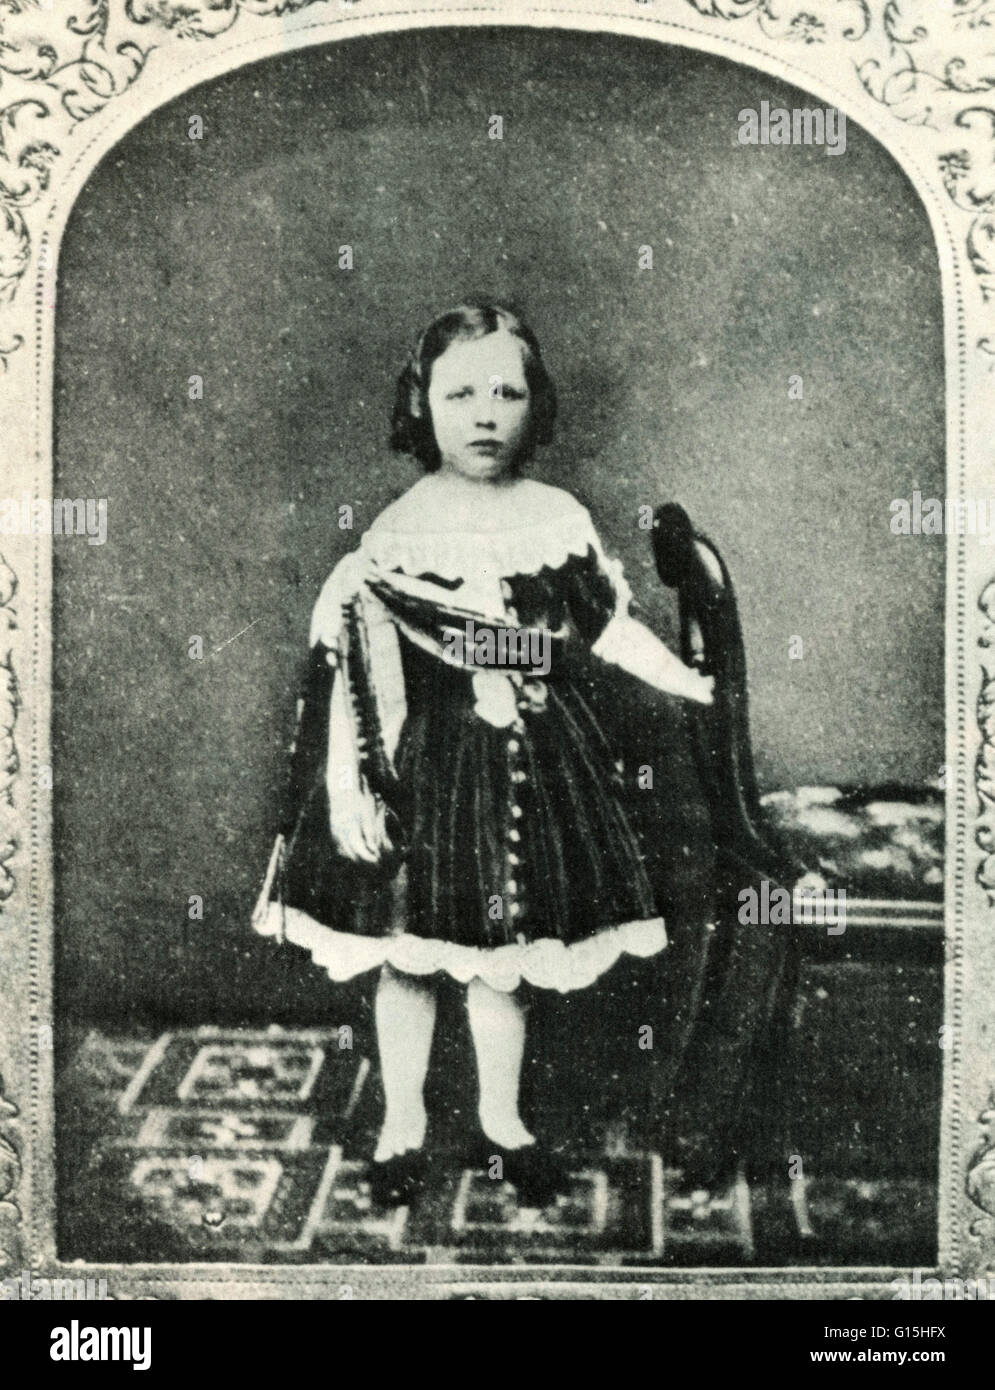 Undated portrait of Oscar Wilde as a young child. Oscar Fingal O'Flahertie Wills Wilde (October 16, 1854 - November 30, 1900) was an Irish writer and poet. After writing in different forms, he became one of London's most popular playwrights. He is remembe Stock Photo